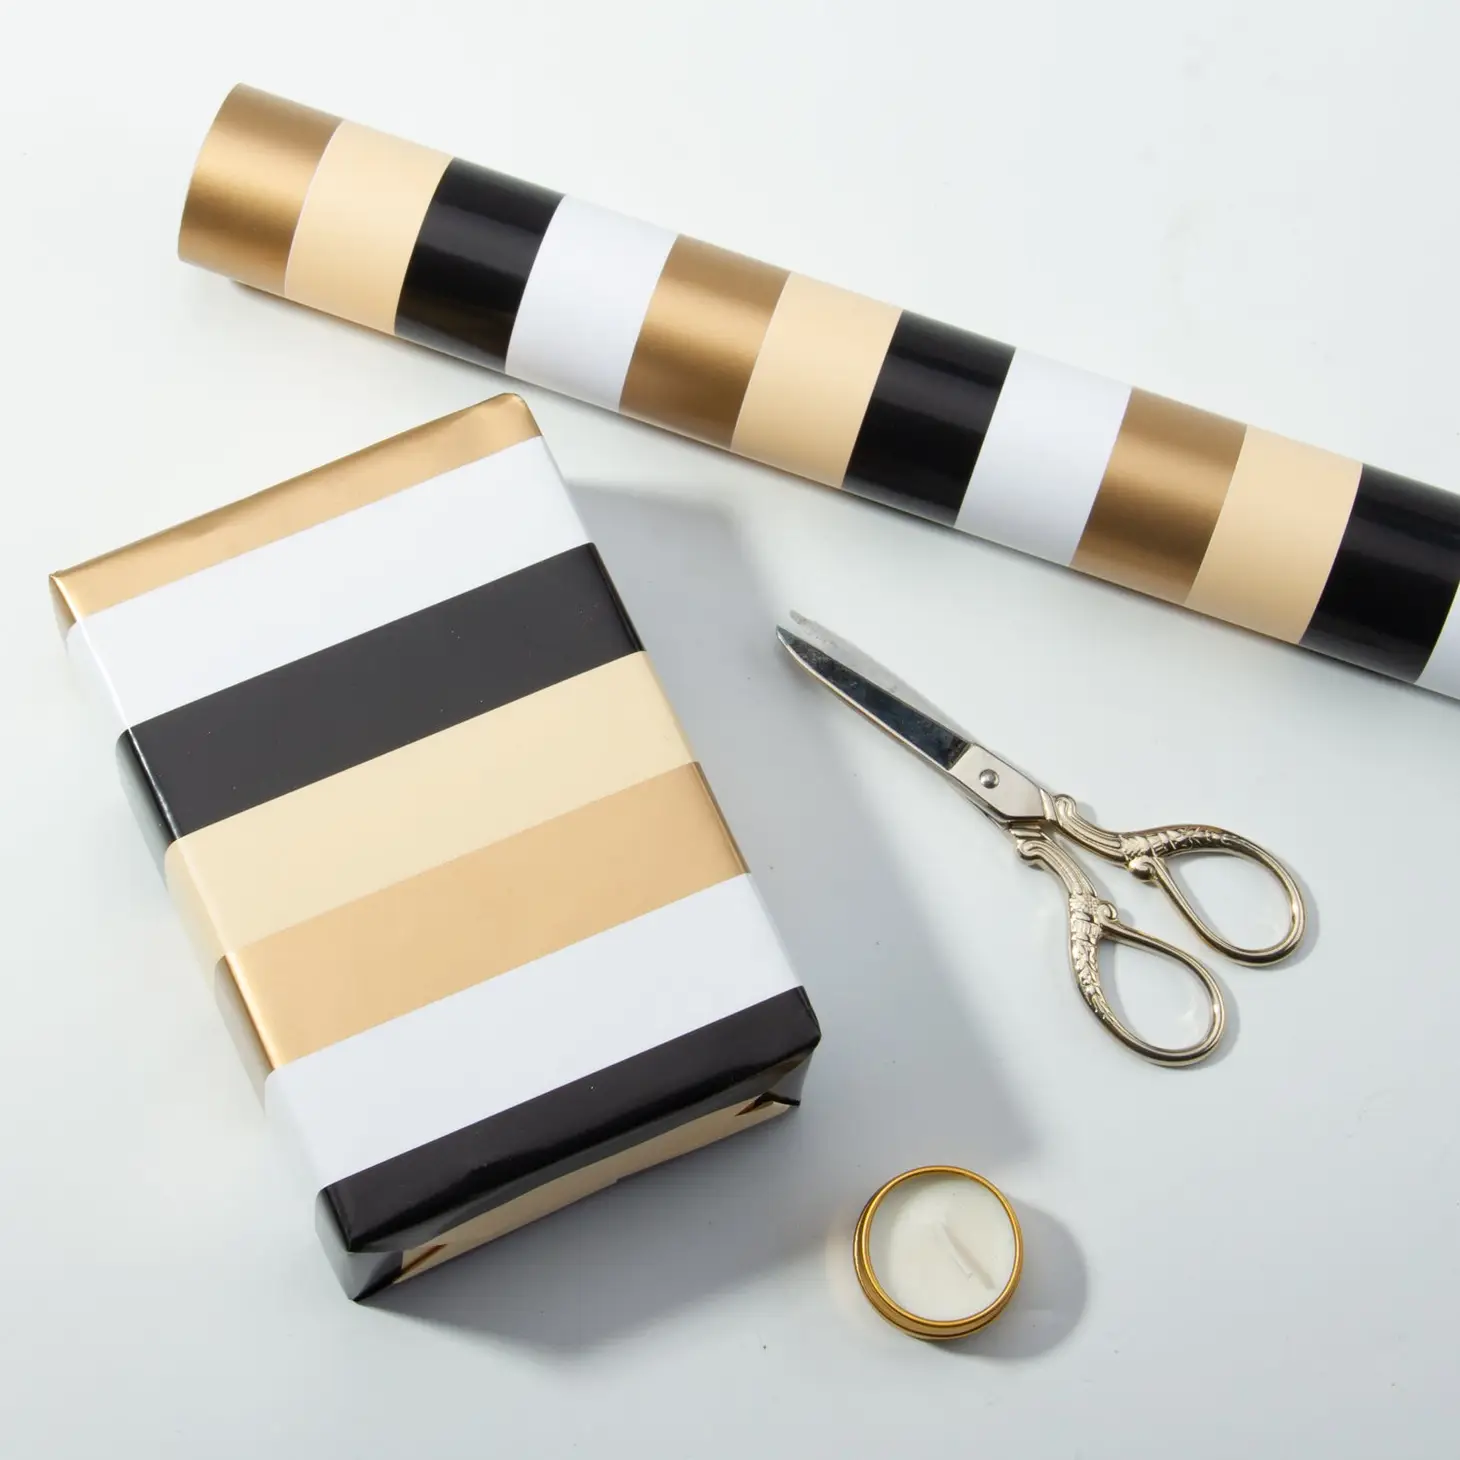 Birthday Wrapping Paper 3 Roll Bundle - Gold Foil Stripes -